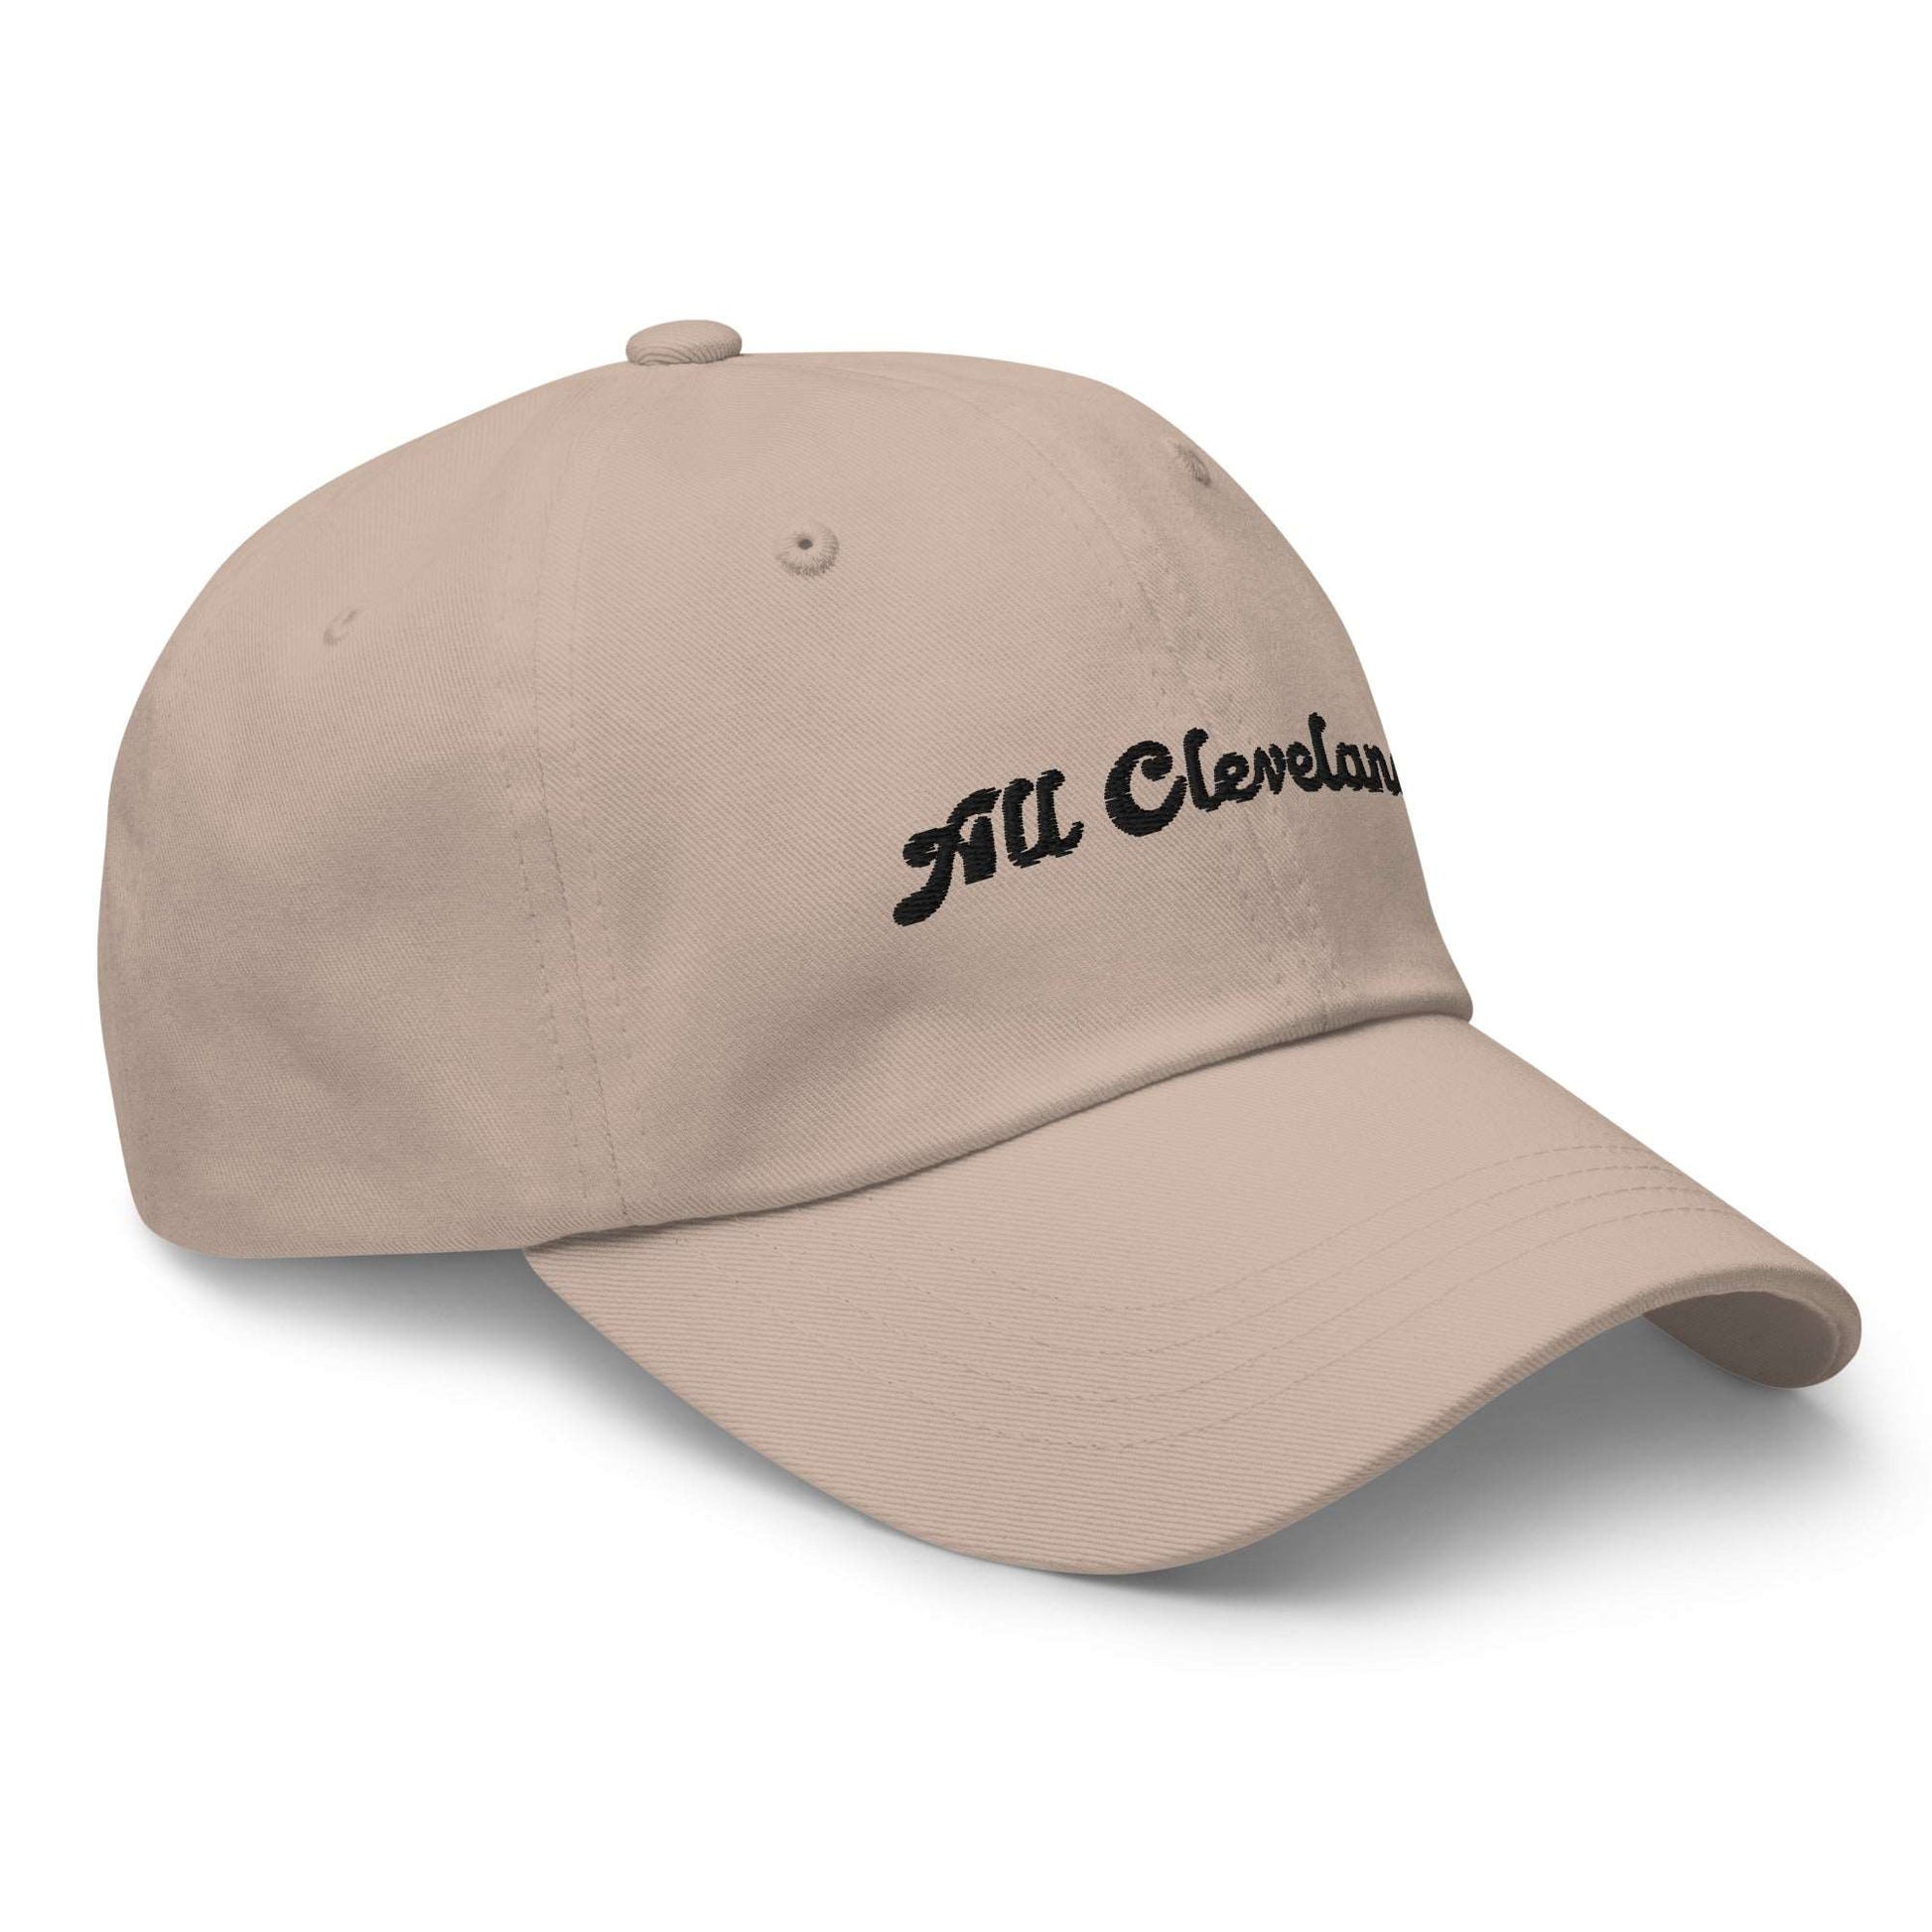 All Cleveland Dad Hat